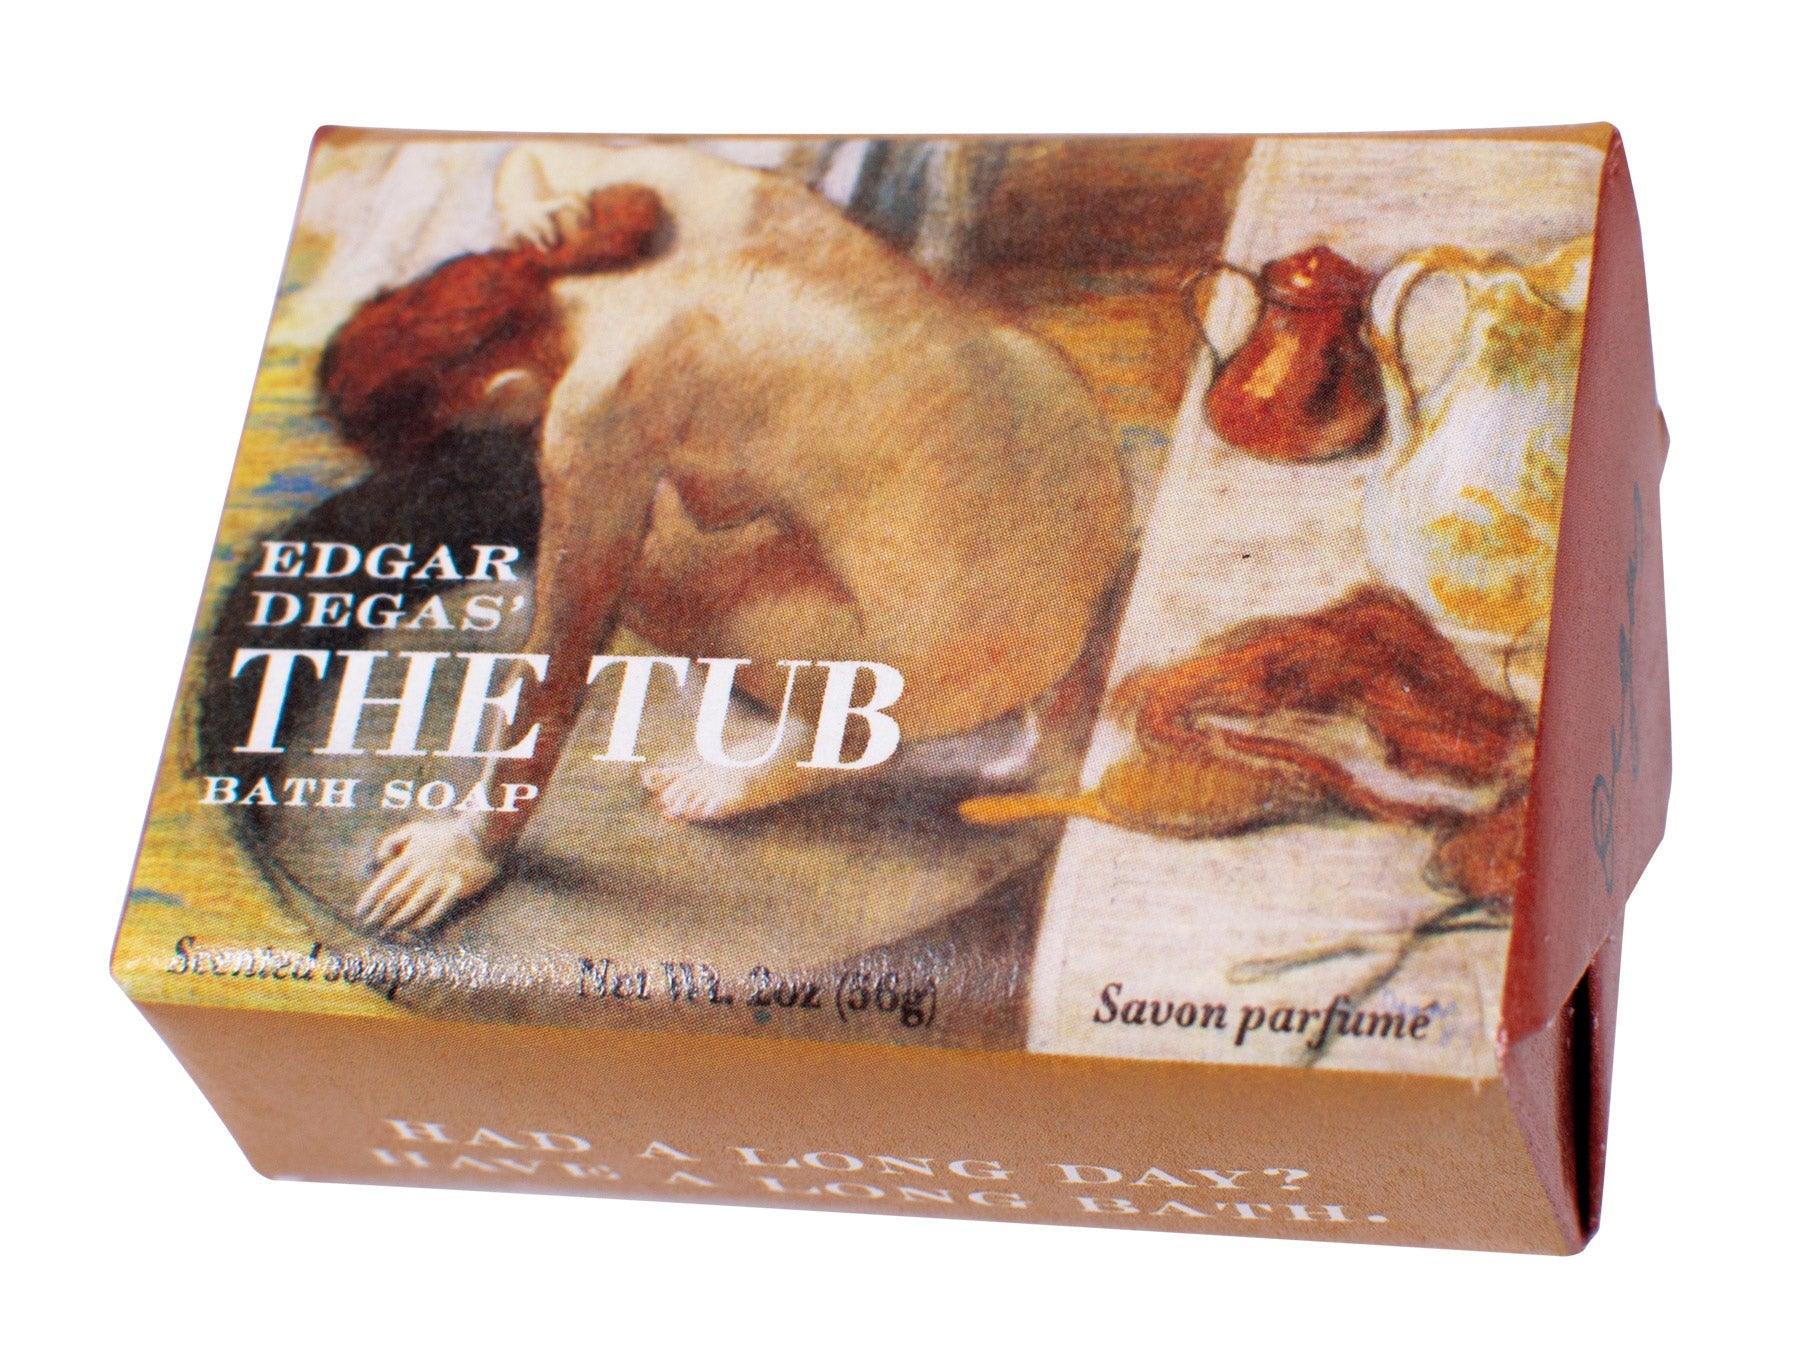 Product photo of Edgar Degas' The Tub Bath Soap, a novelty gift manufactured by The Unemployed Philosophers Guild.